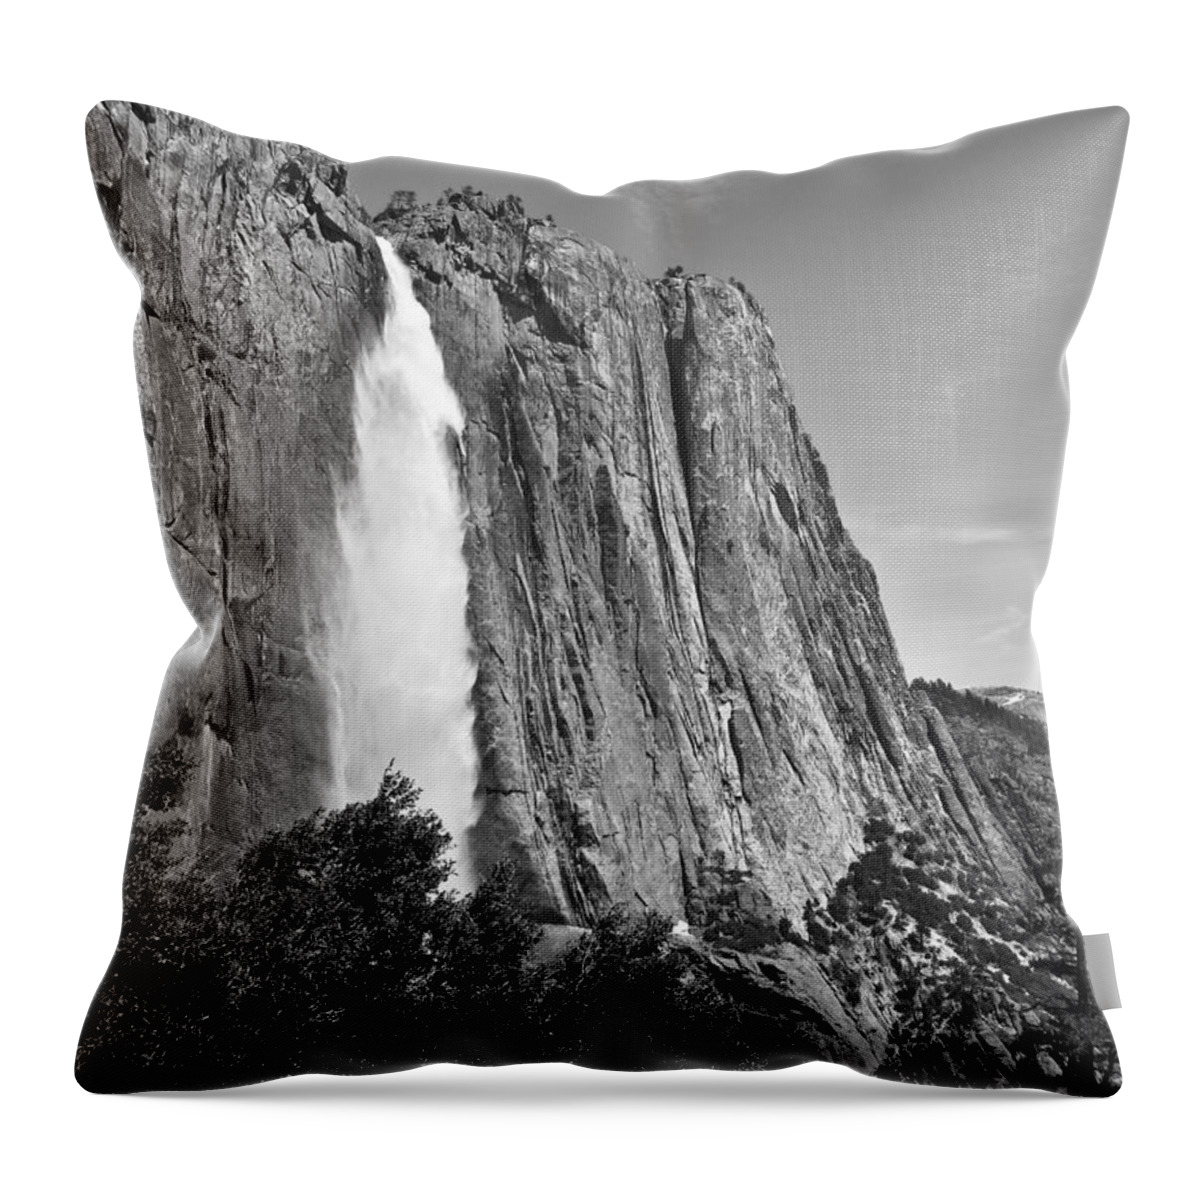 Yosemite National Park Throw Pillow featuring the photograph Upper Yosemite Fall with Half Dome by Shane Kelly